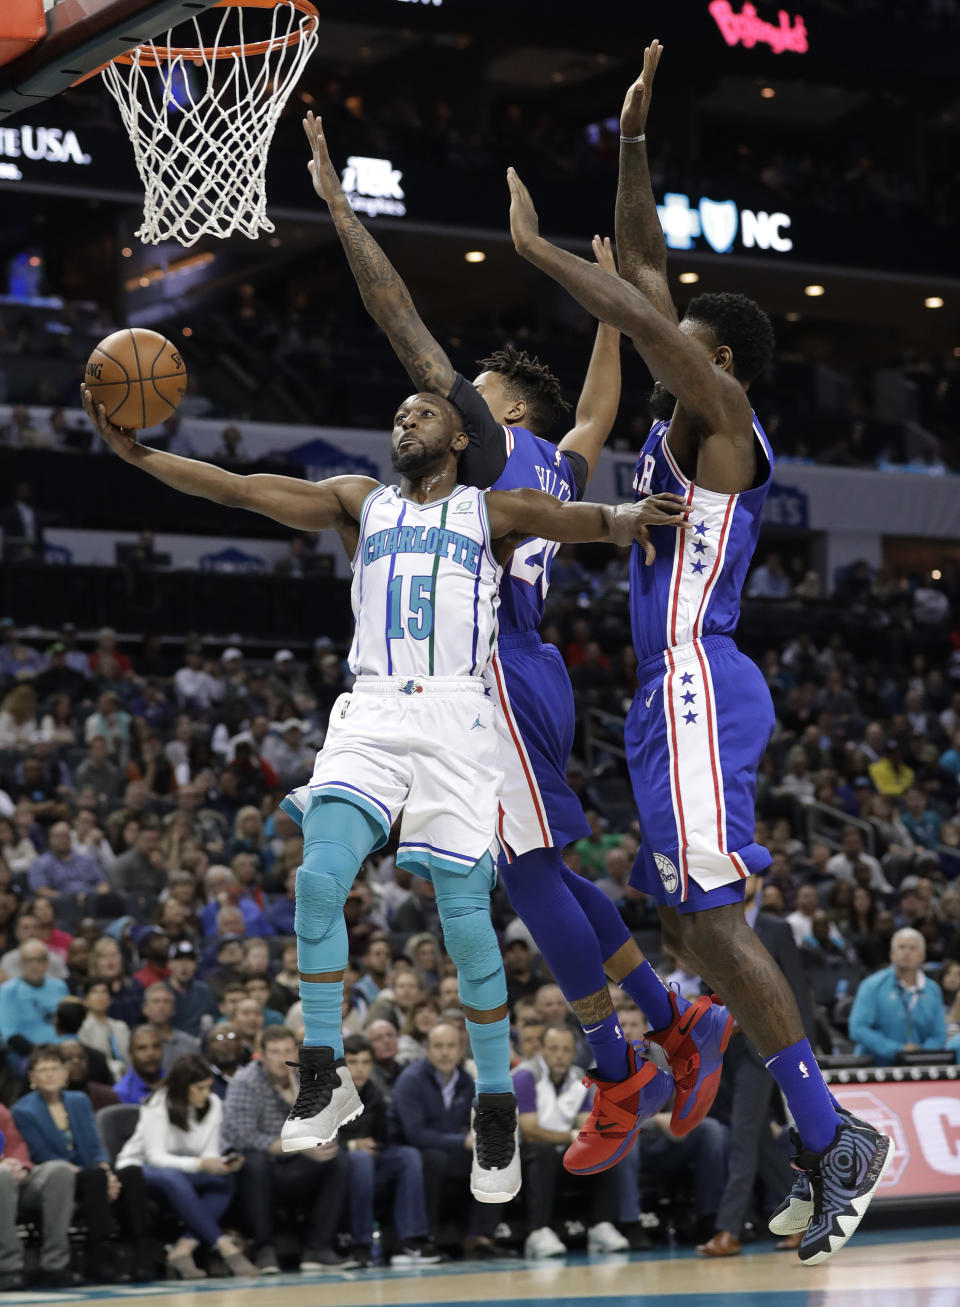 Charlotte Hornets' Kemba Walker, left, drives past Philadelphia 76ers' Jimmy Butler, back, and Joel Embiid during the first half of an NBA basketball game in Charlotte, N.C., Saturday, Nov. 17, 2018. (AP Photo/Chuck Burton)